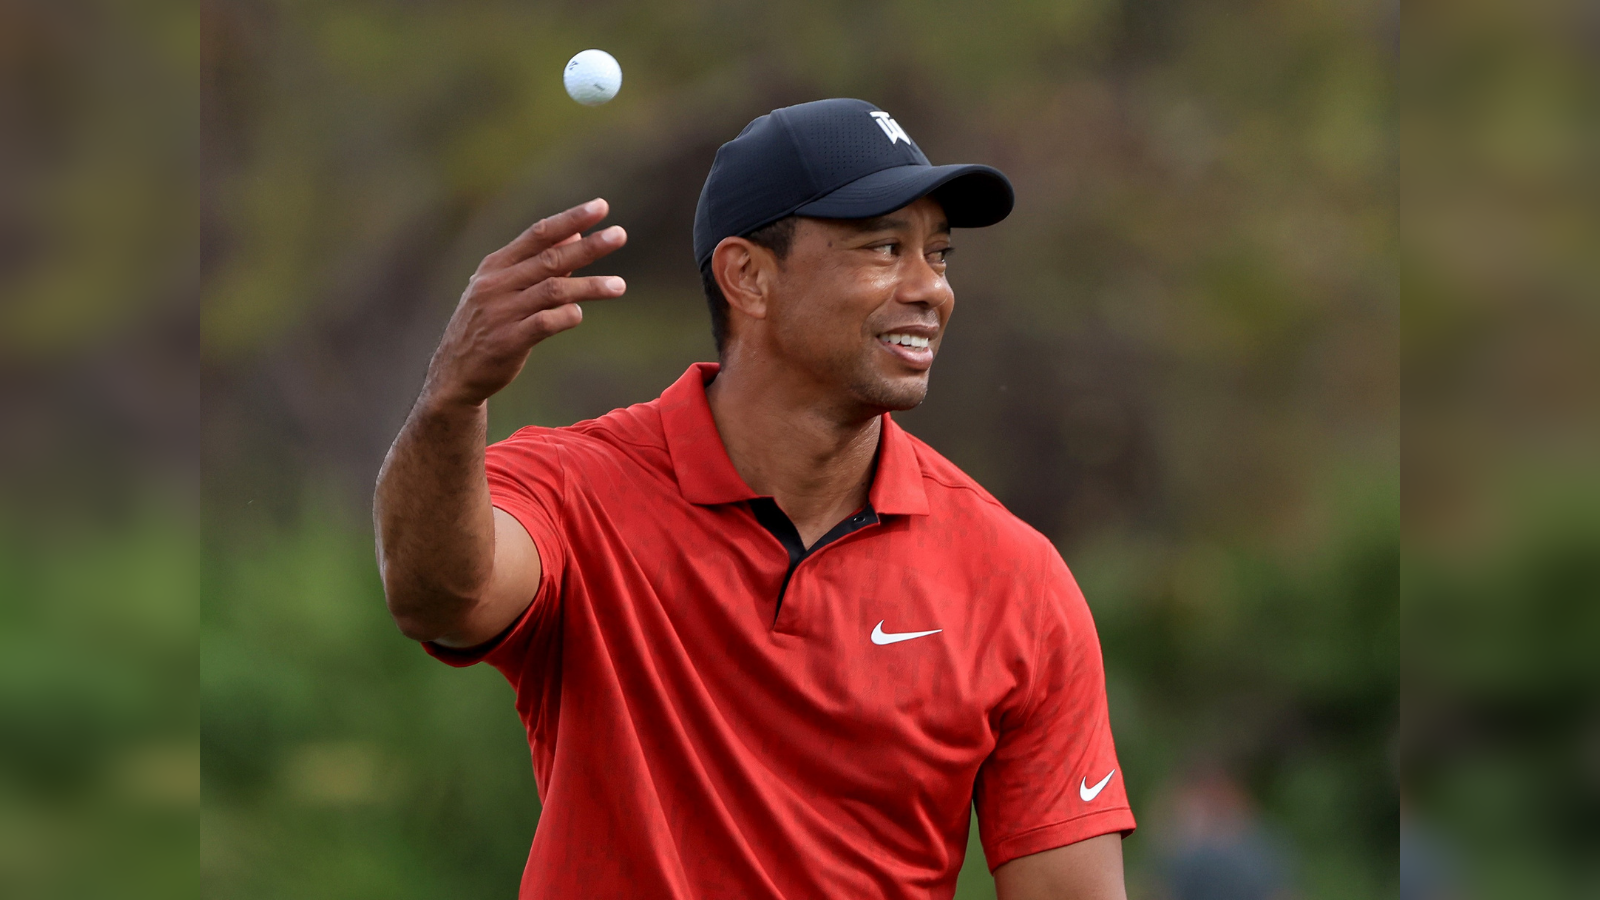 Tiger Woods: 'Bond' movie buff, a Buddhist and a stint in Stanford  classroom: Tiger Woods, away from the headlines - The Economic Times